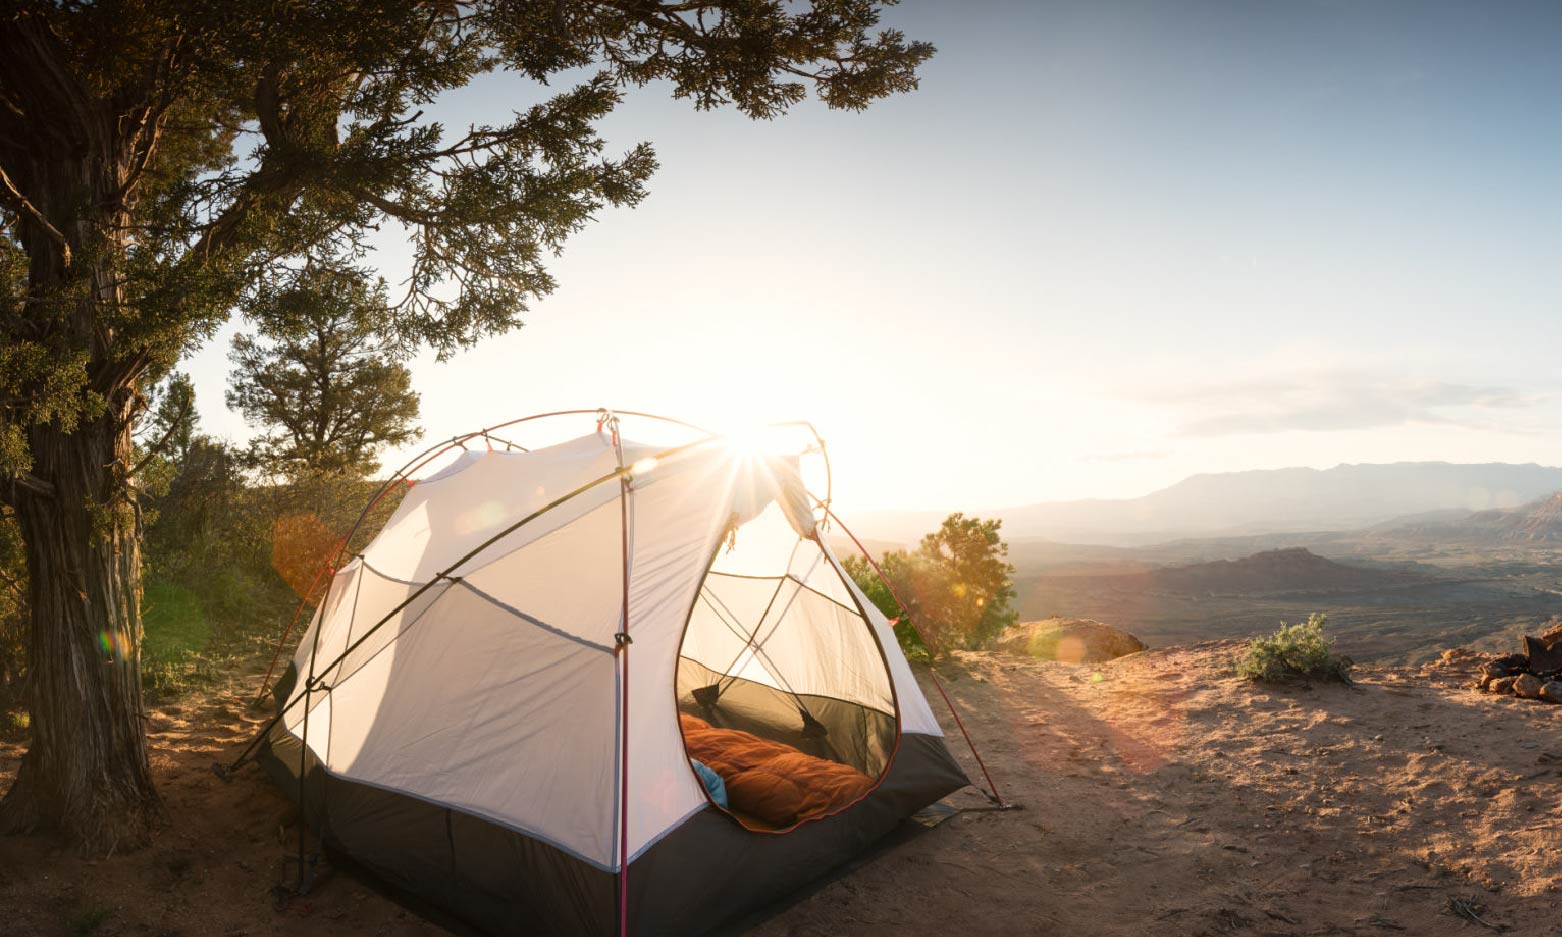 Camping List for Tent